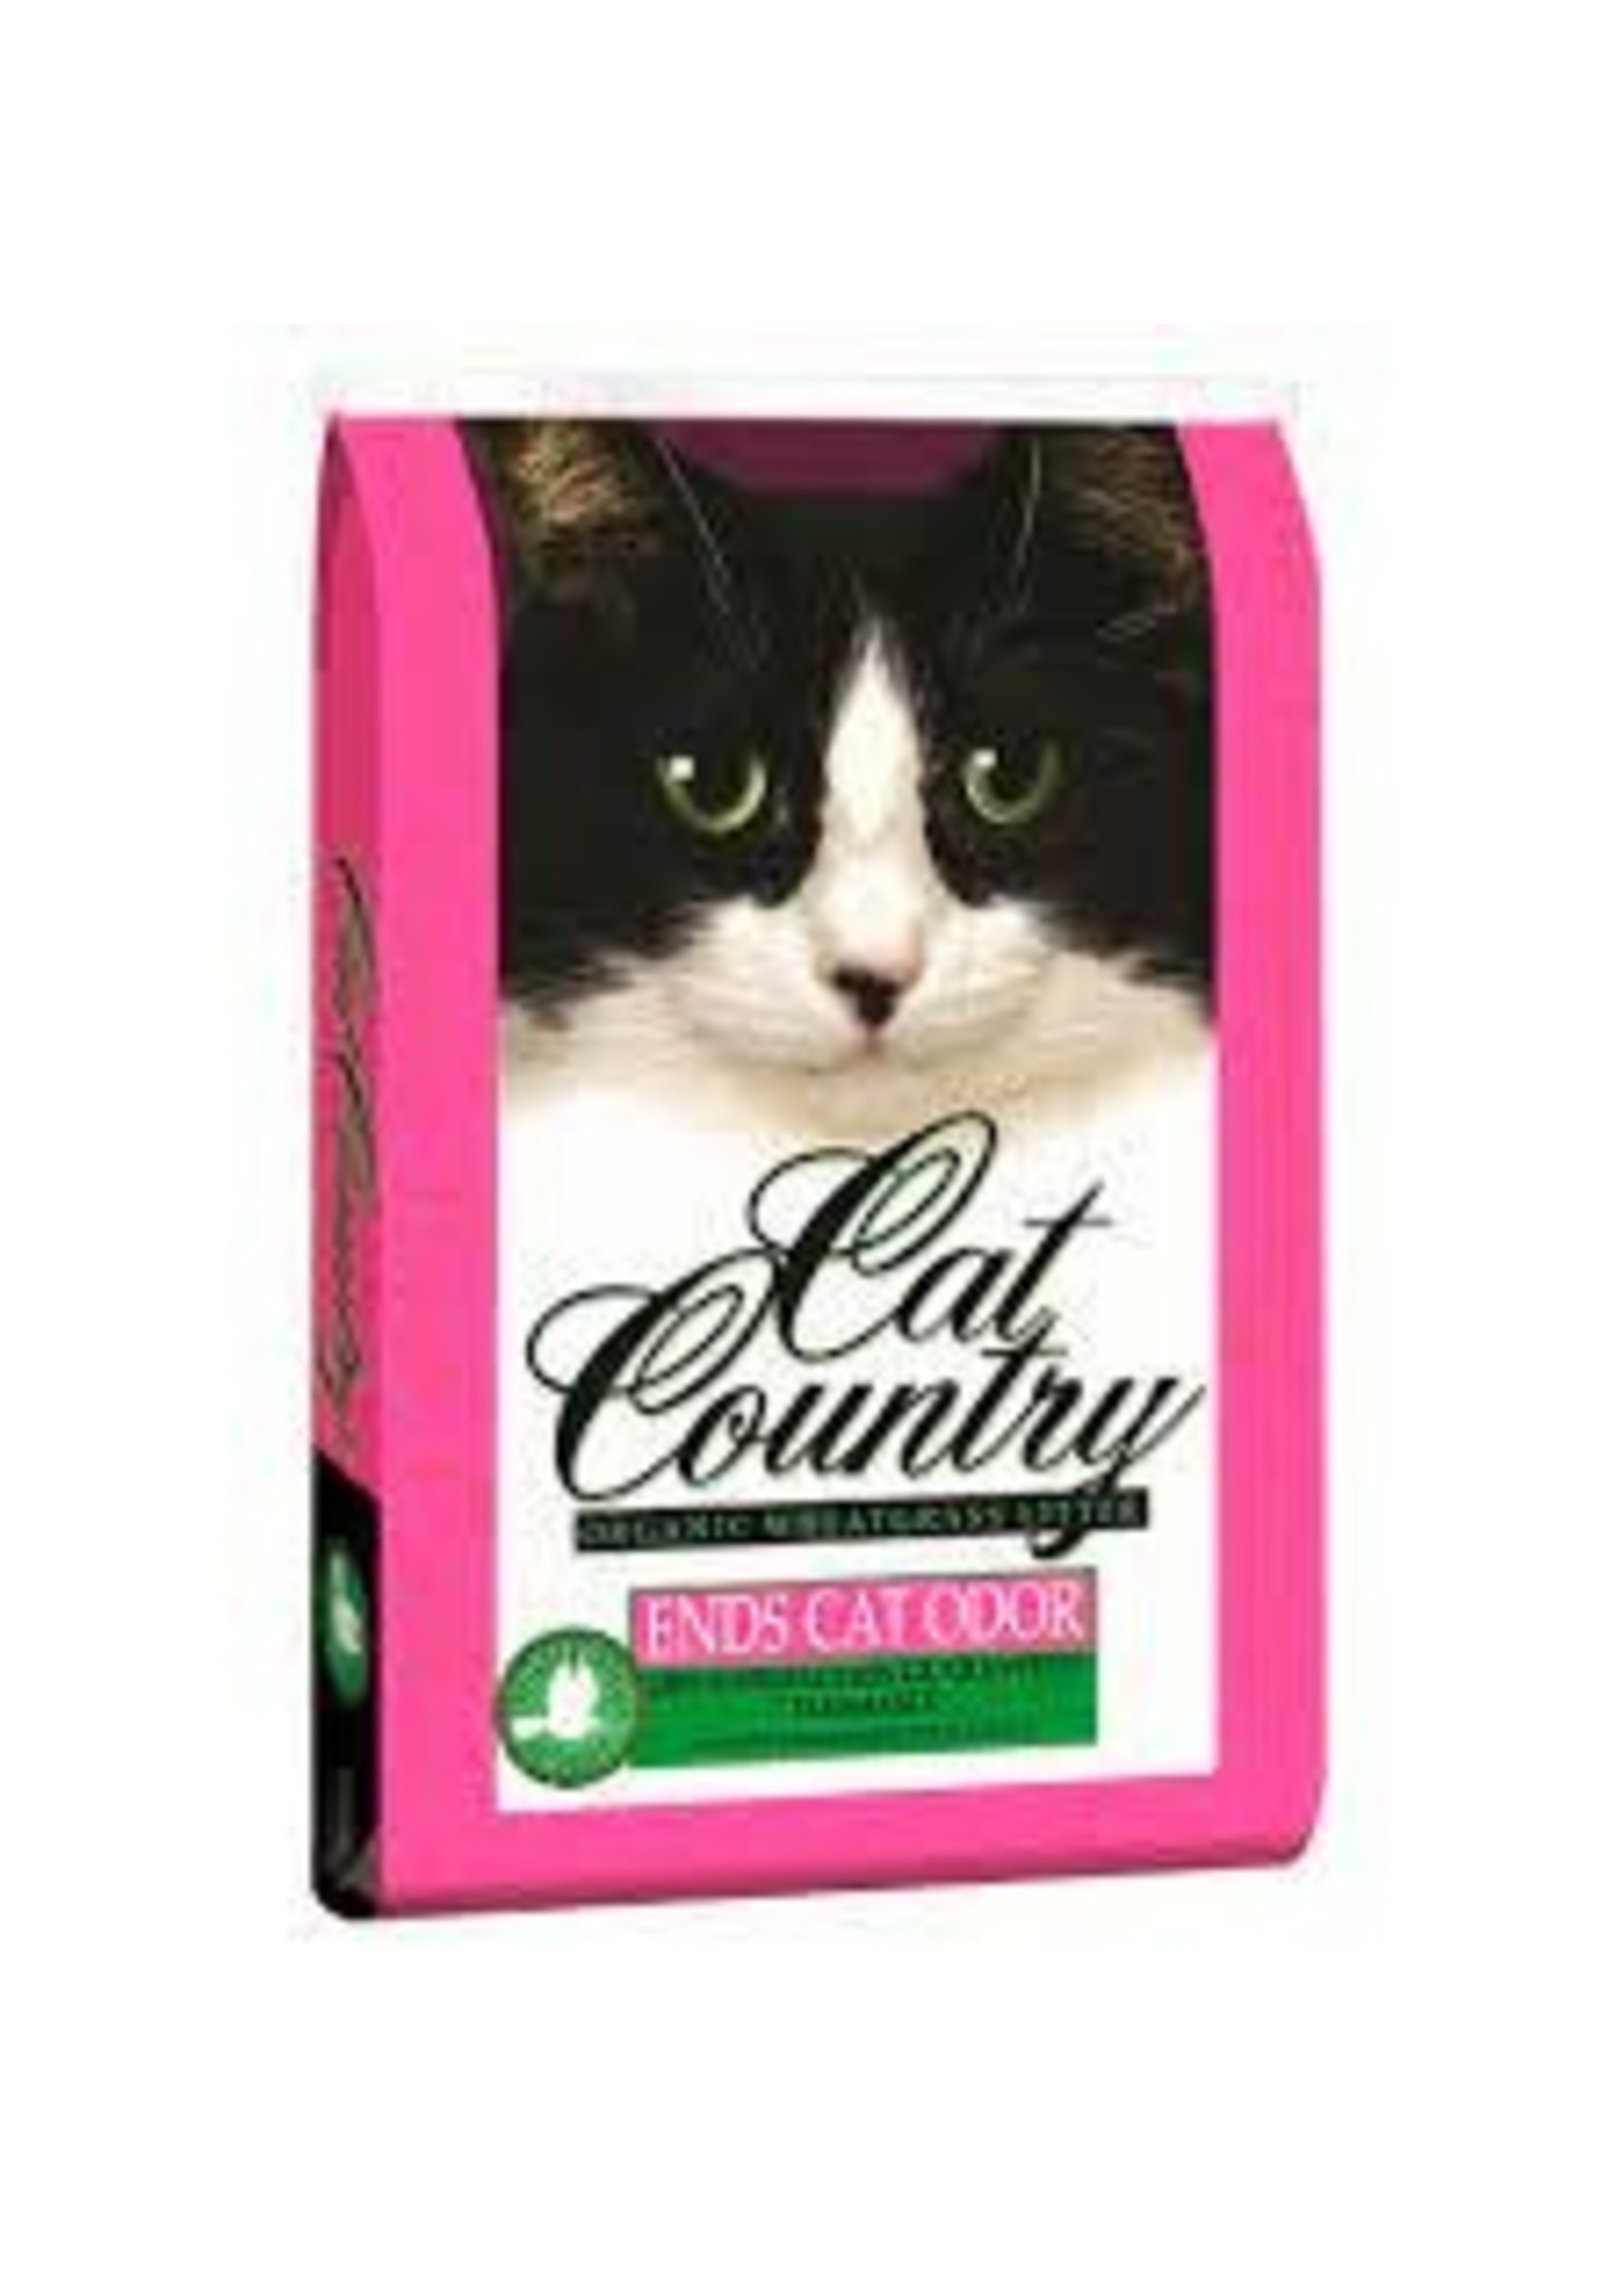 Cat Country Mountain Meadow  - Cat Country Organic Wheat grass Litter 40lb